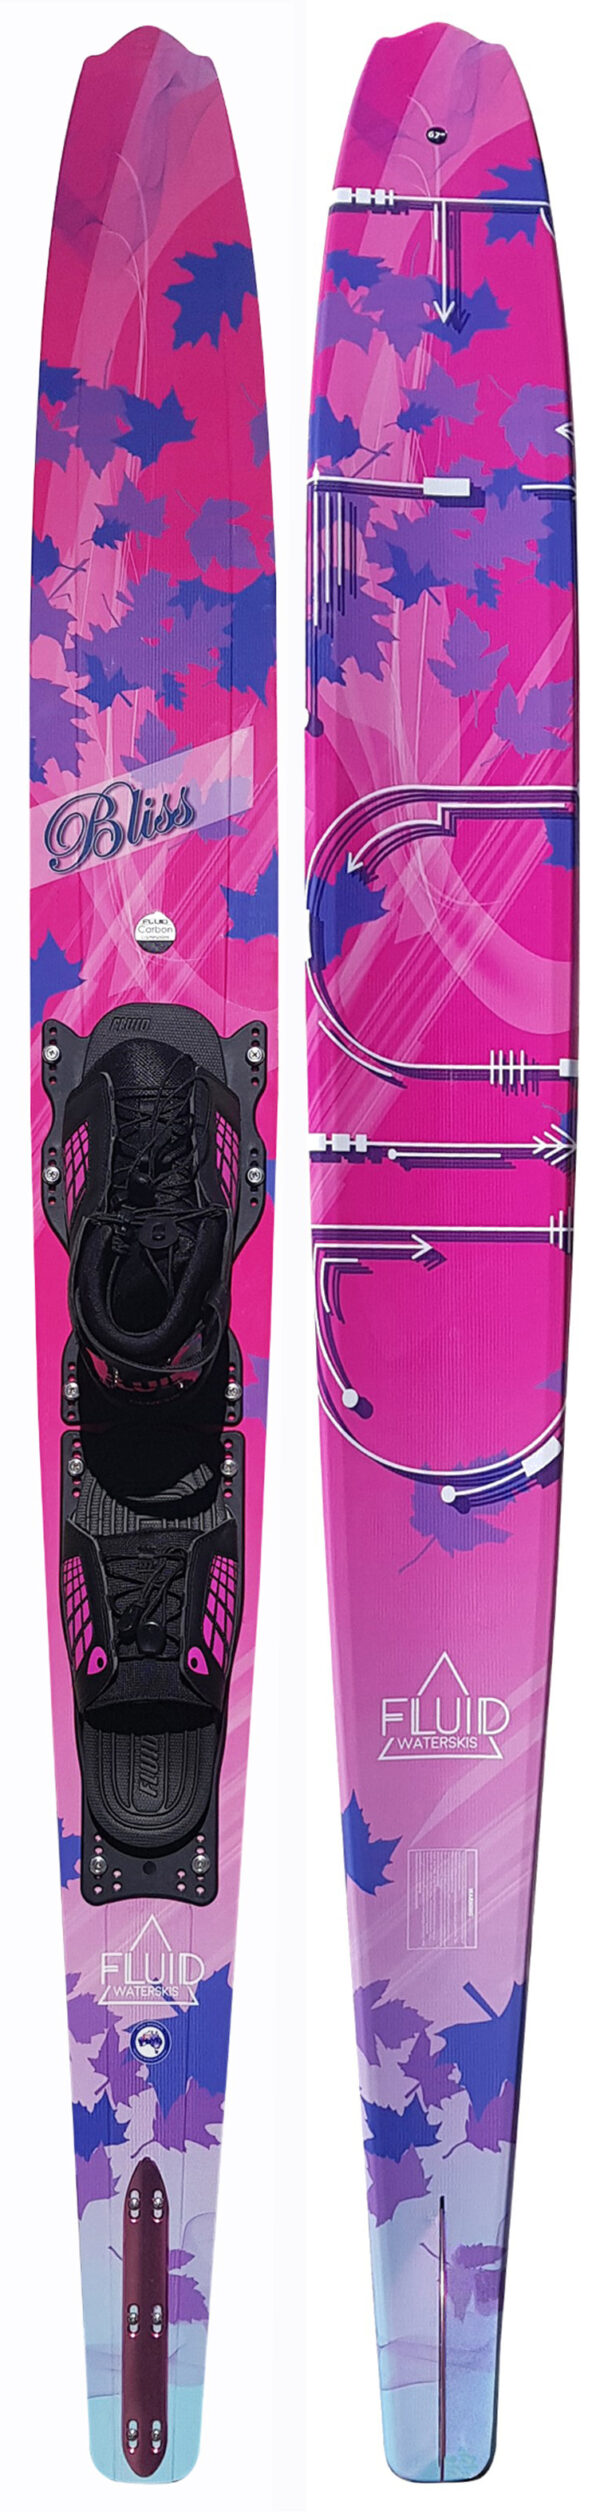 Fluid Bliss Womens Ski With Genesis Boot and ARTP